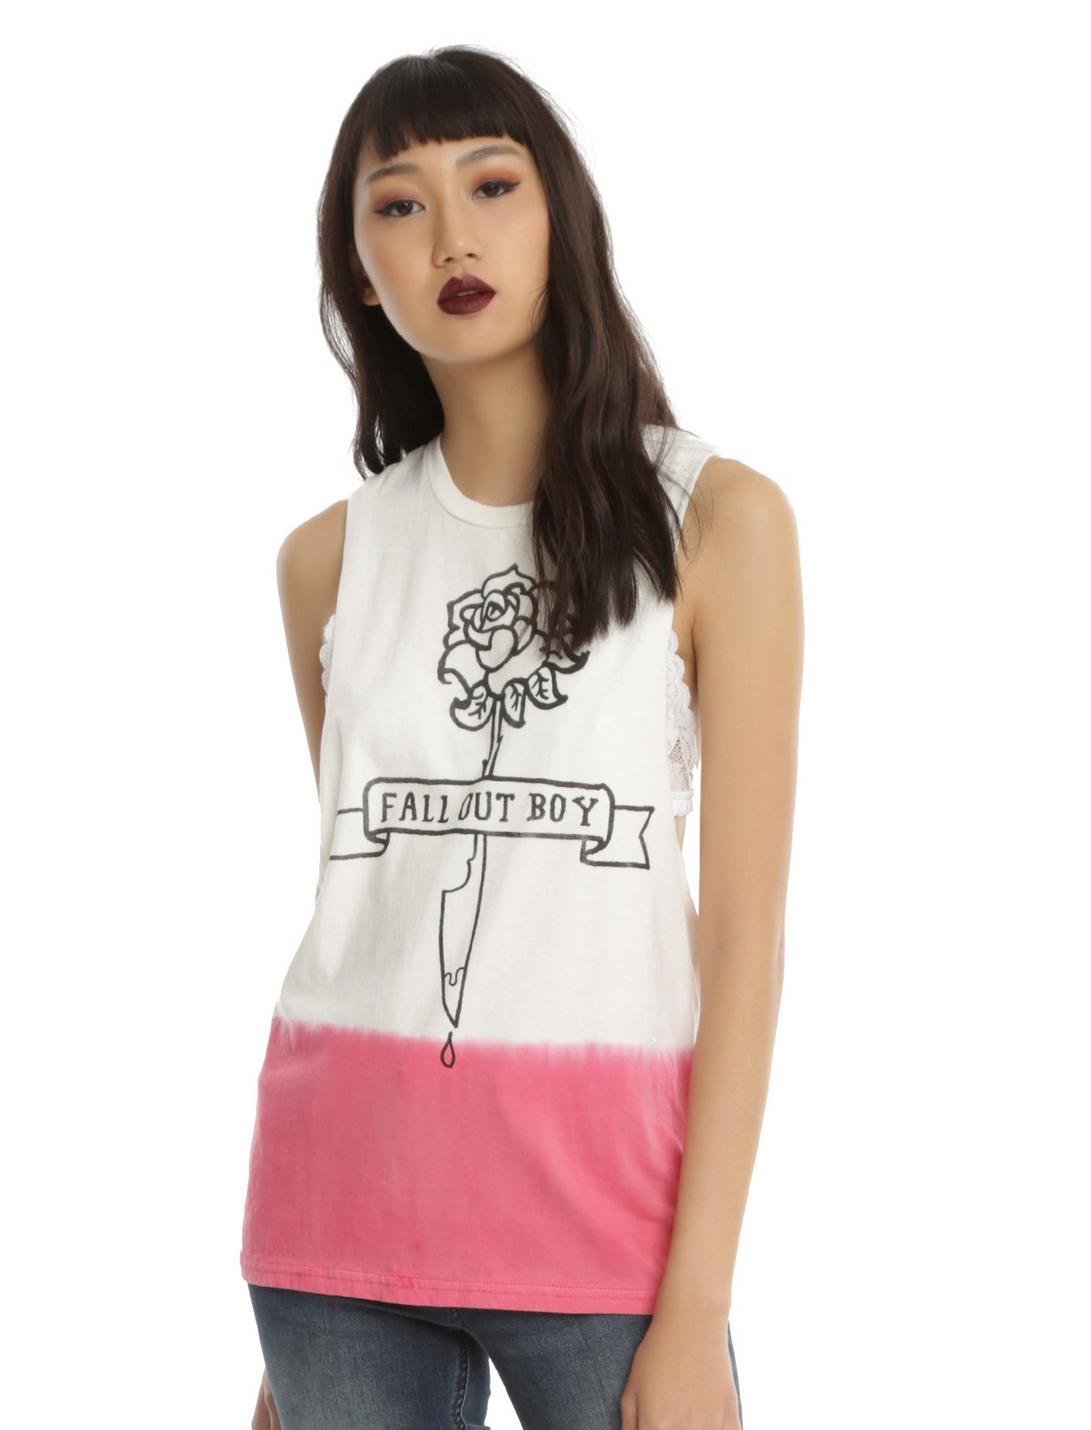 Fall Out Boy American Psycho Tie Dye Girls Muscle Top, WHITE, hi-res